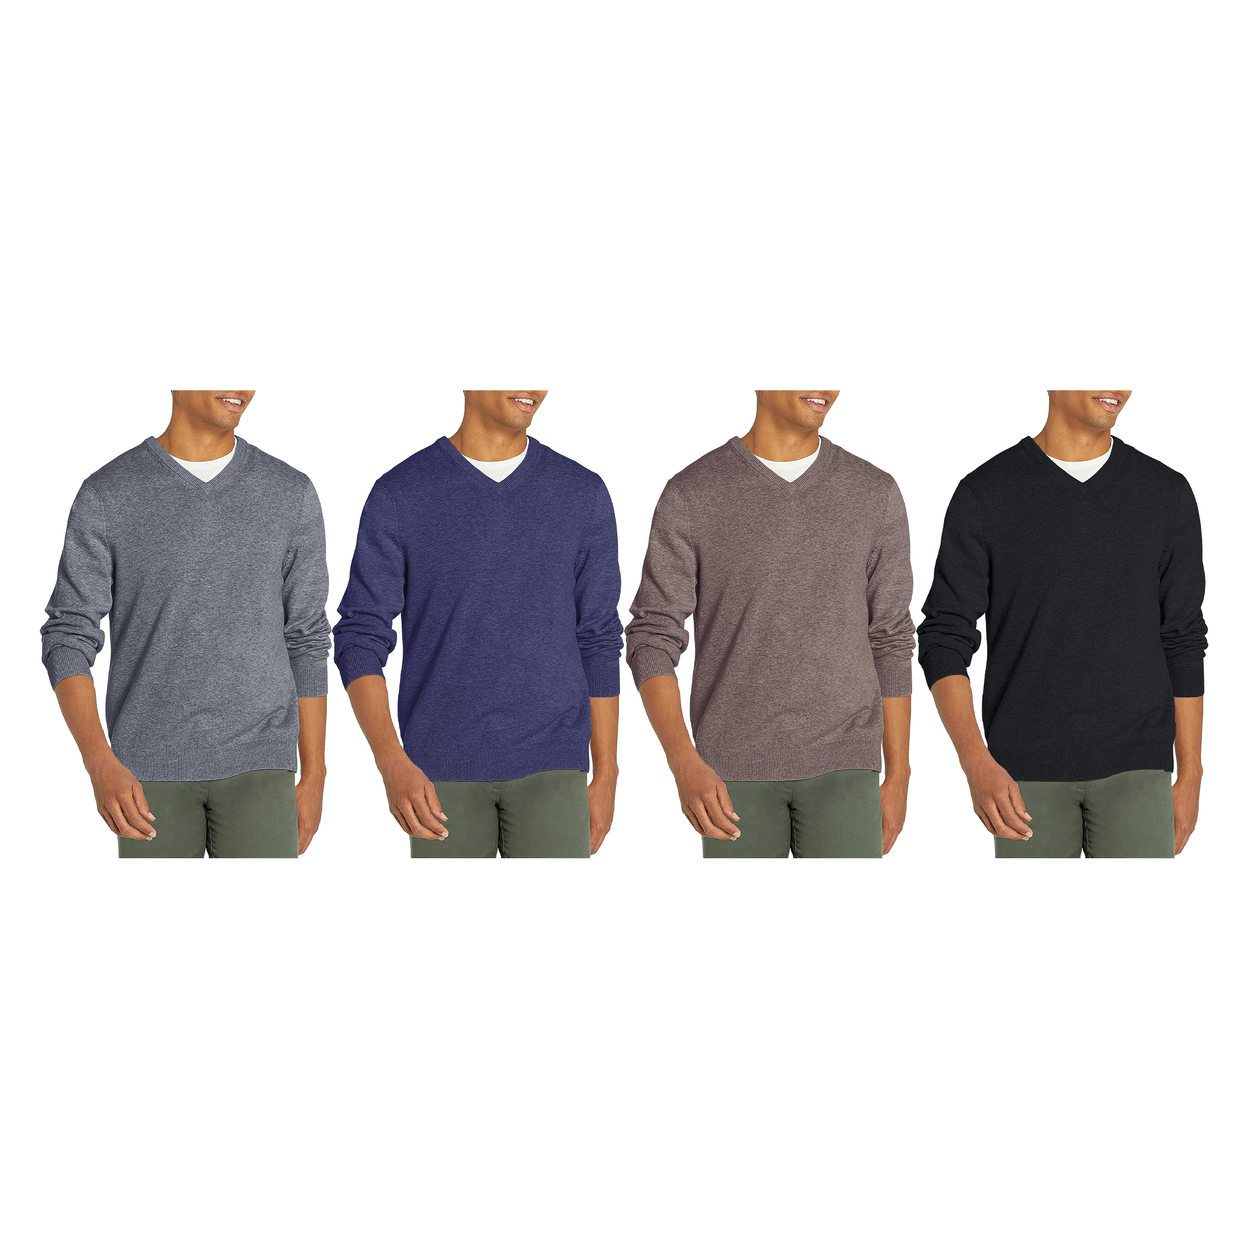 Men's Casual Ultra-Soft Slim Fit Warm Knit V-Neck Sweater - Grey, Small